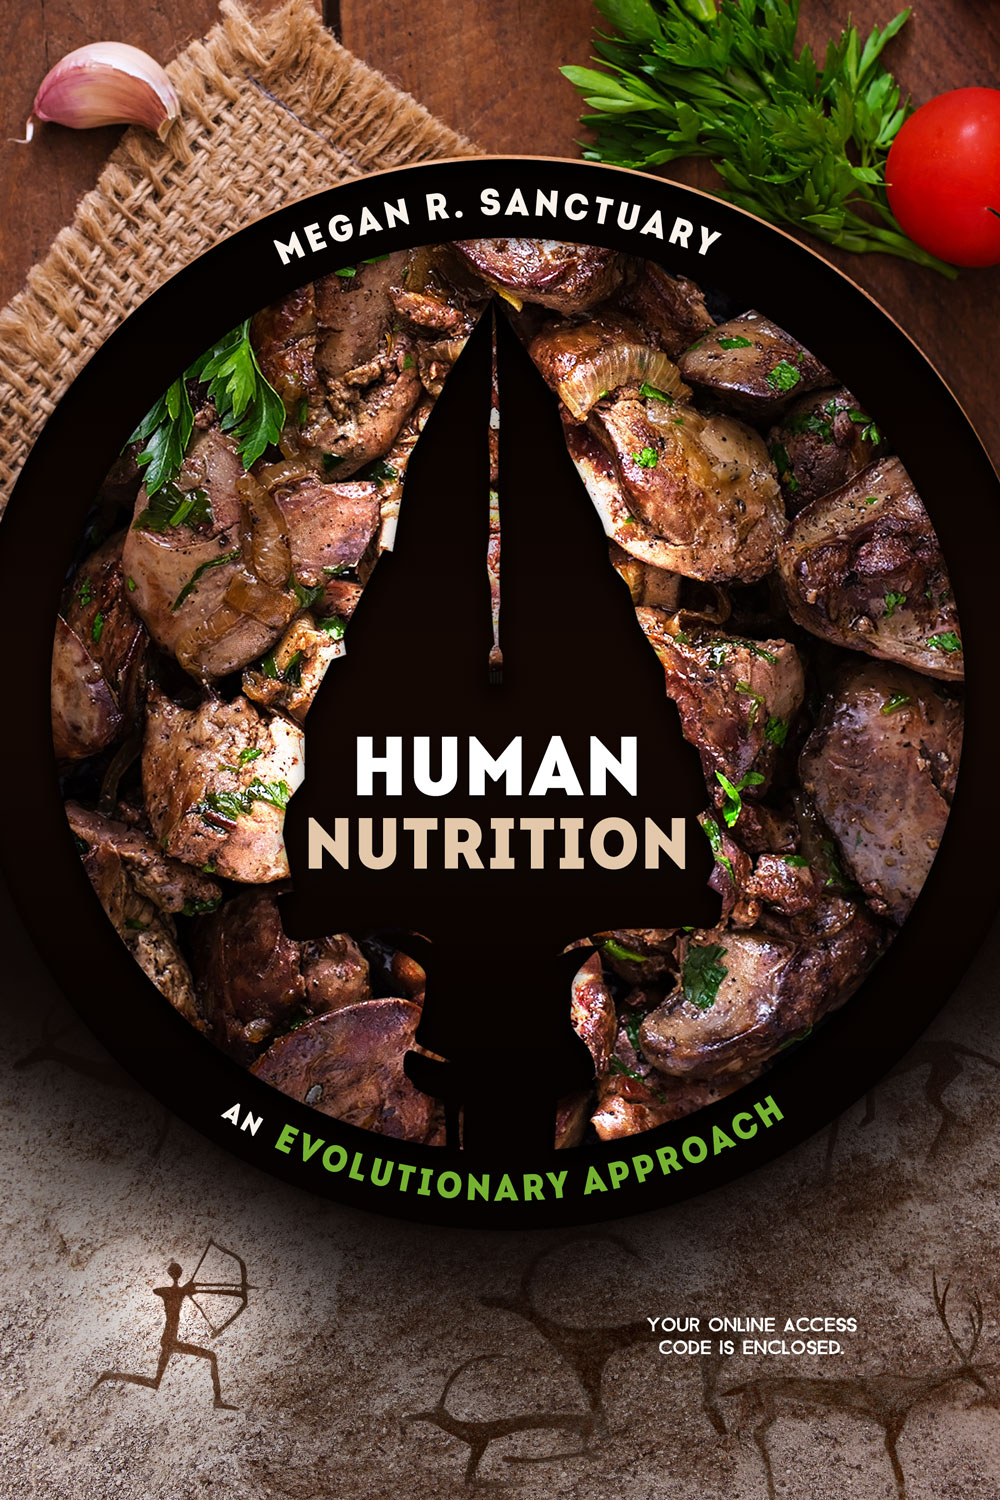 Human Nutrition - access card image